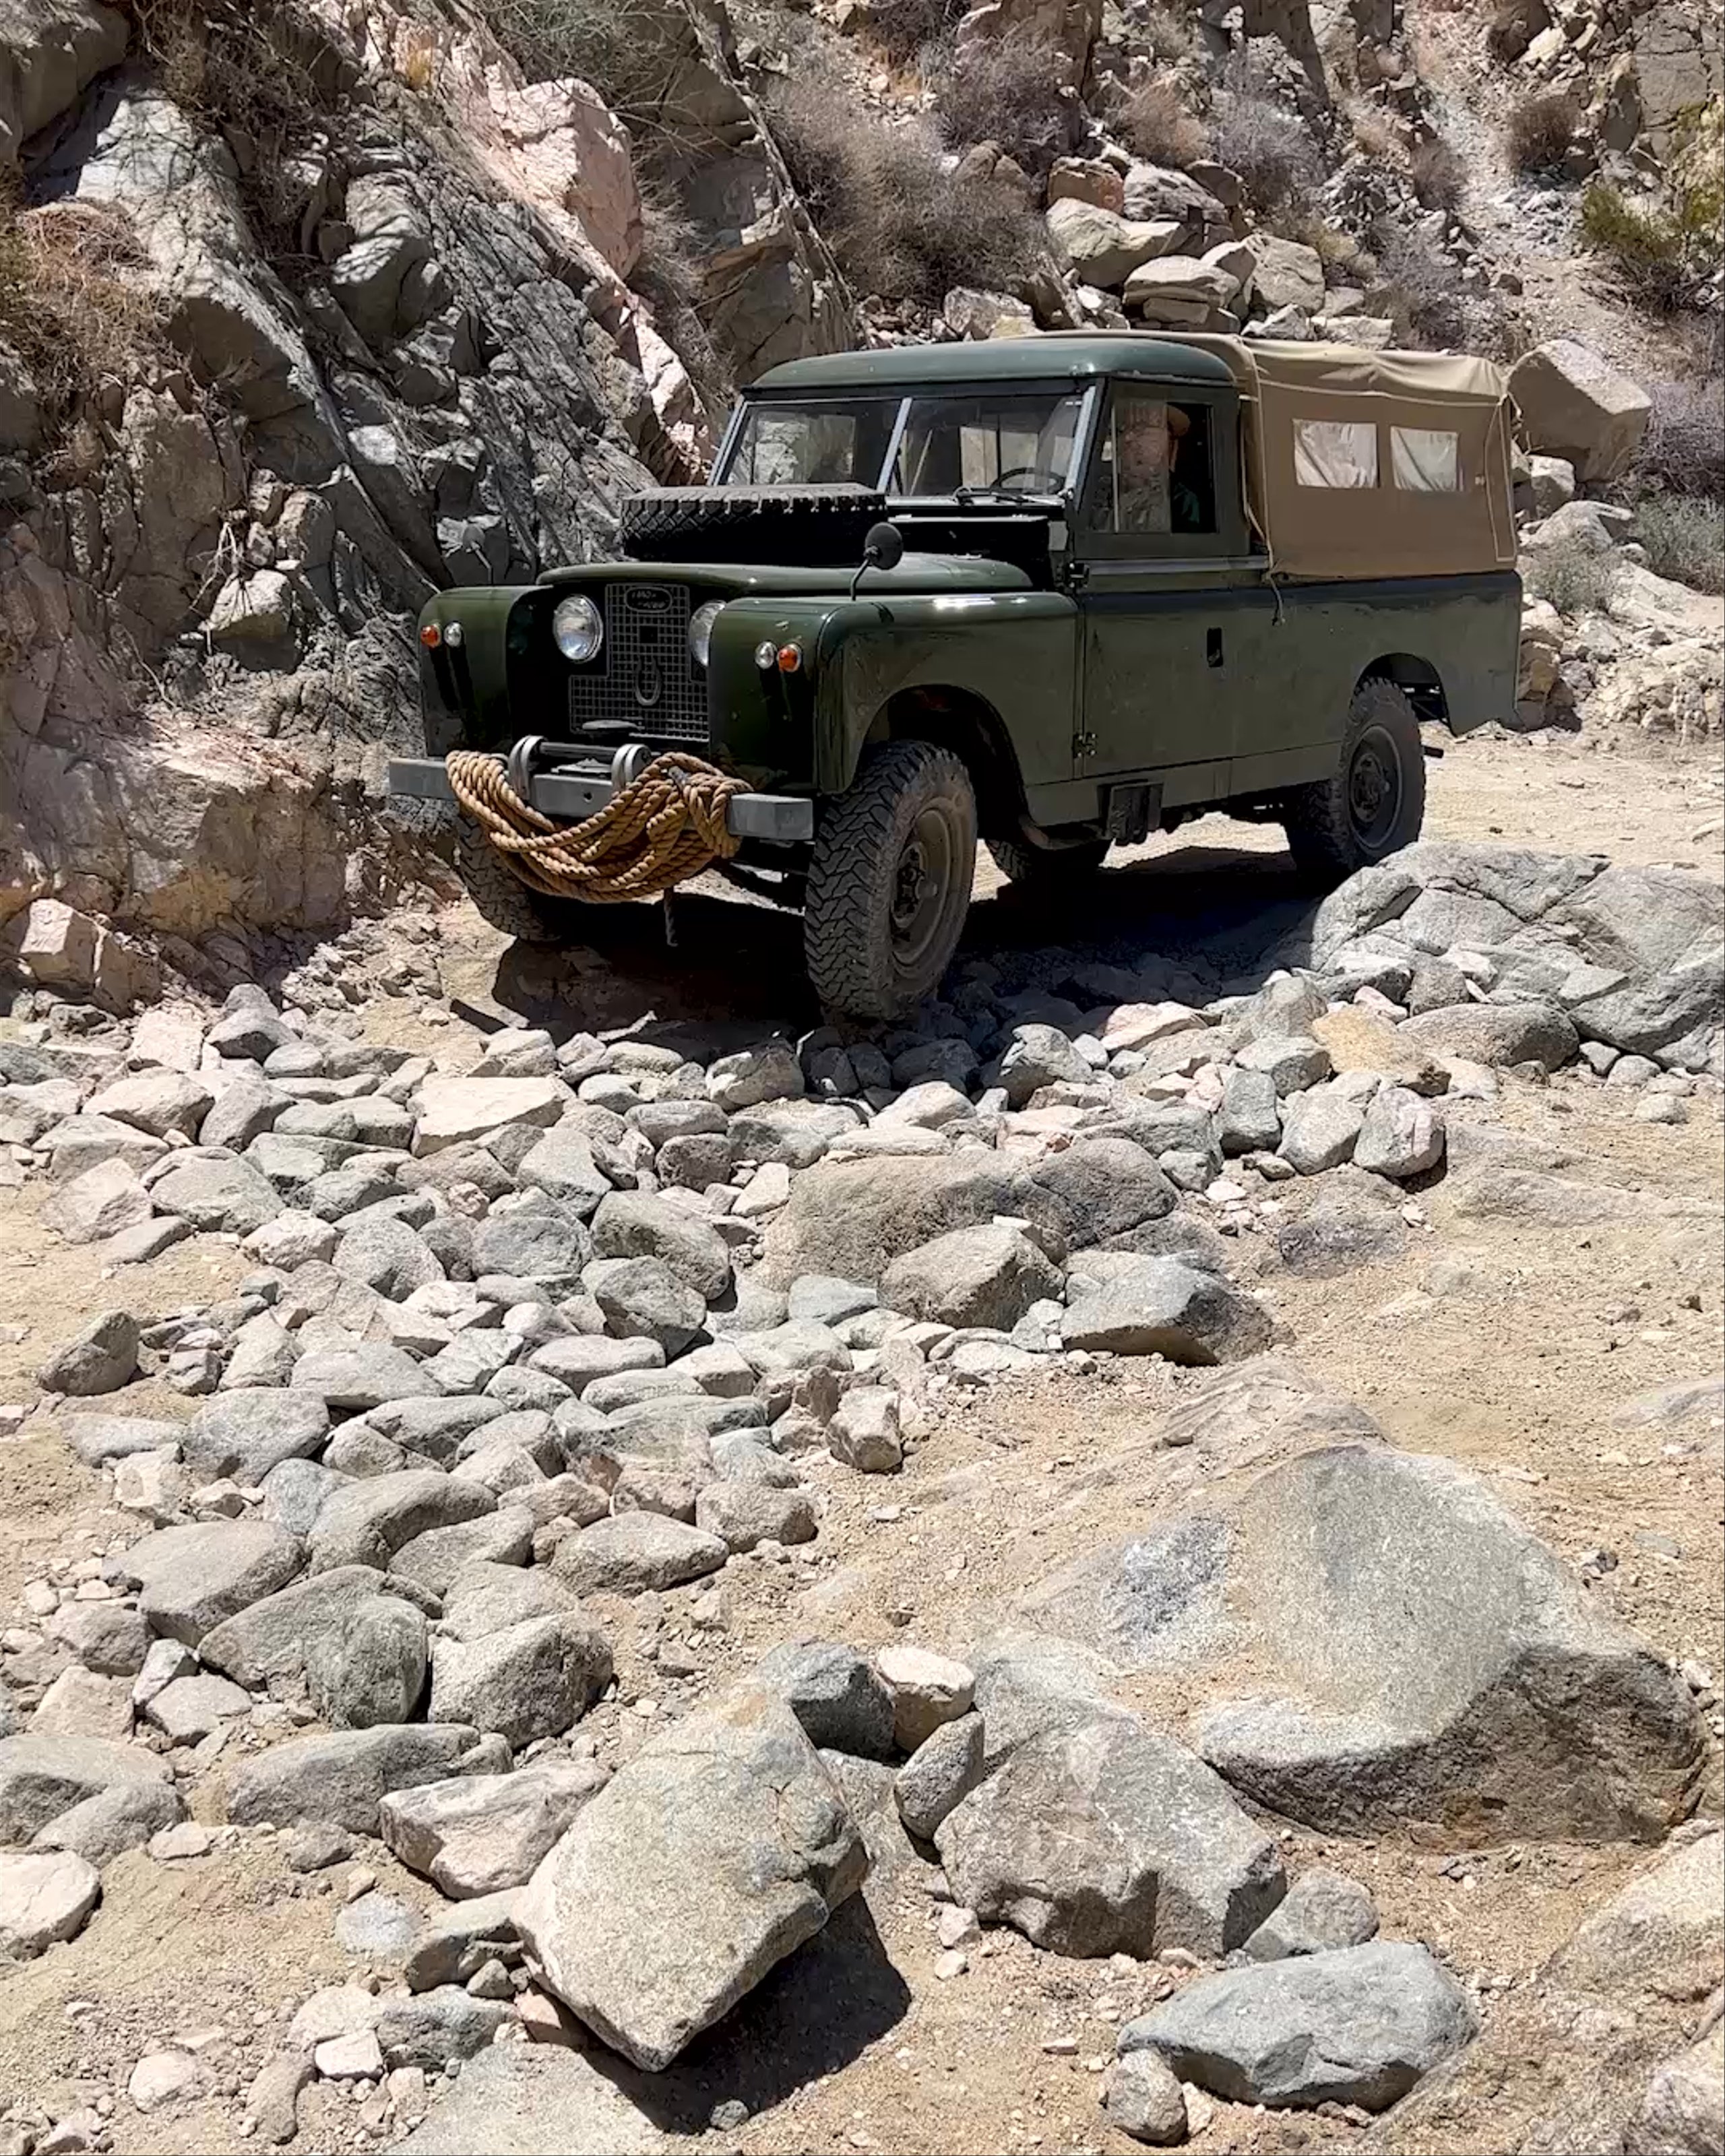 Vintage Land Rover off-roading over boulders in Joshua Tree